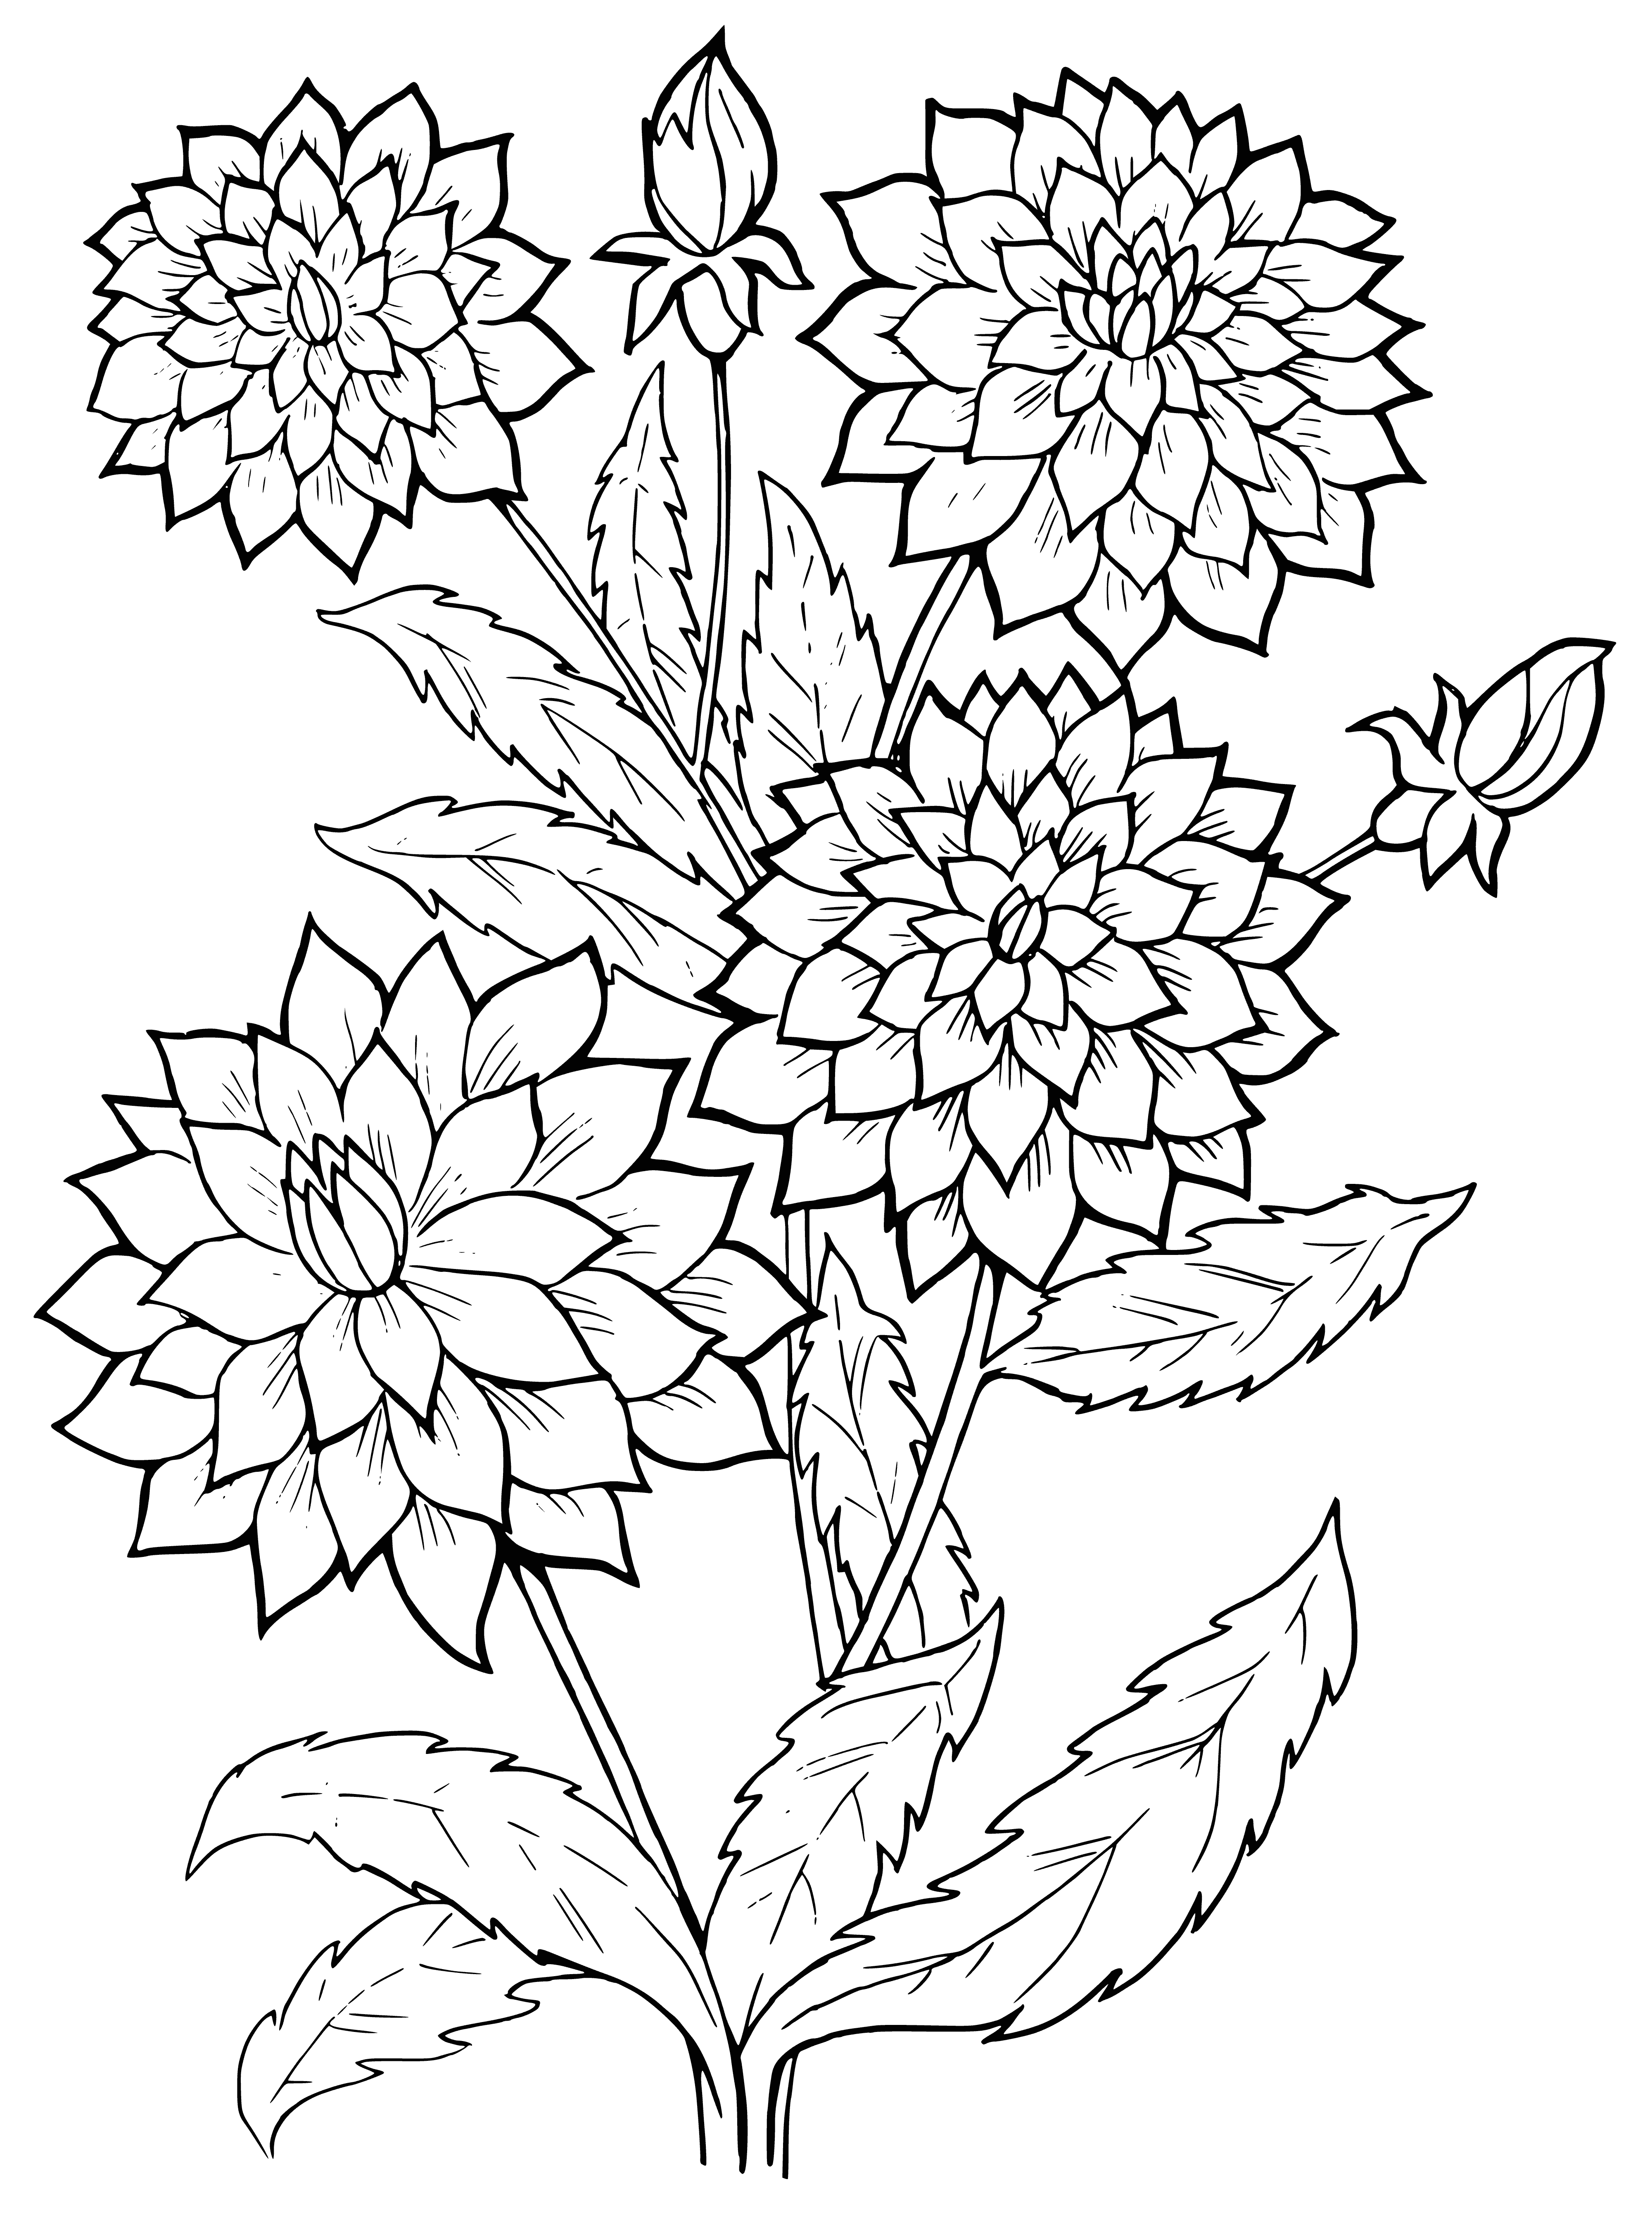 coloring page: A flower w/ purple petals in a spiraling pattern, yellow & green center, & green jagged-edge leaves around the base.